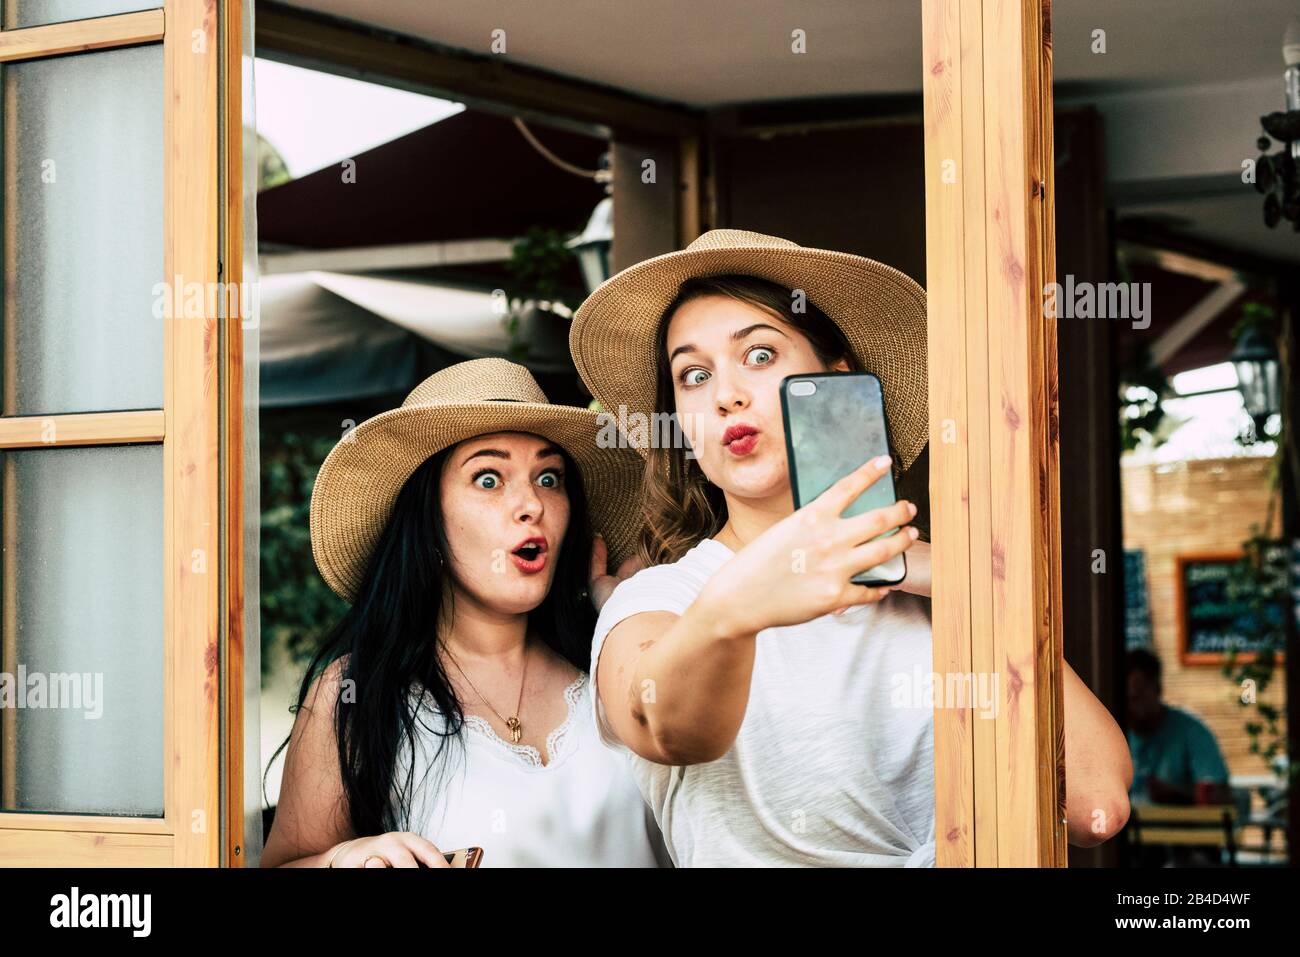 Couple of young caucasian women friends have fun taking selfie pictures together with funny expressions - people enjoying with technology phone device in oudoor Stock Photo